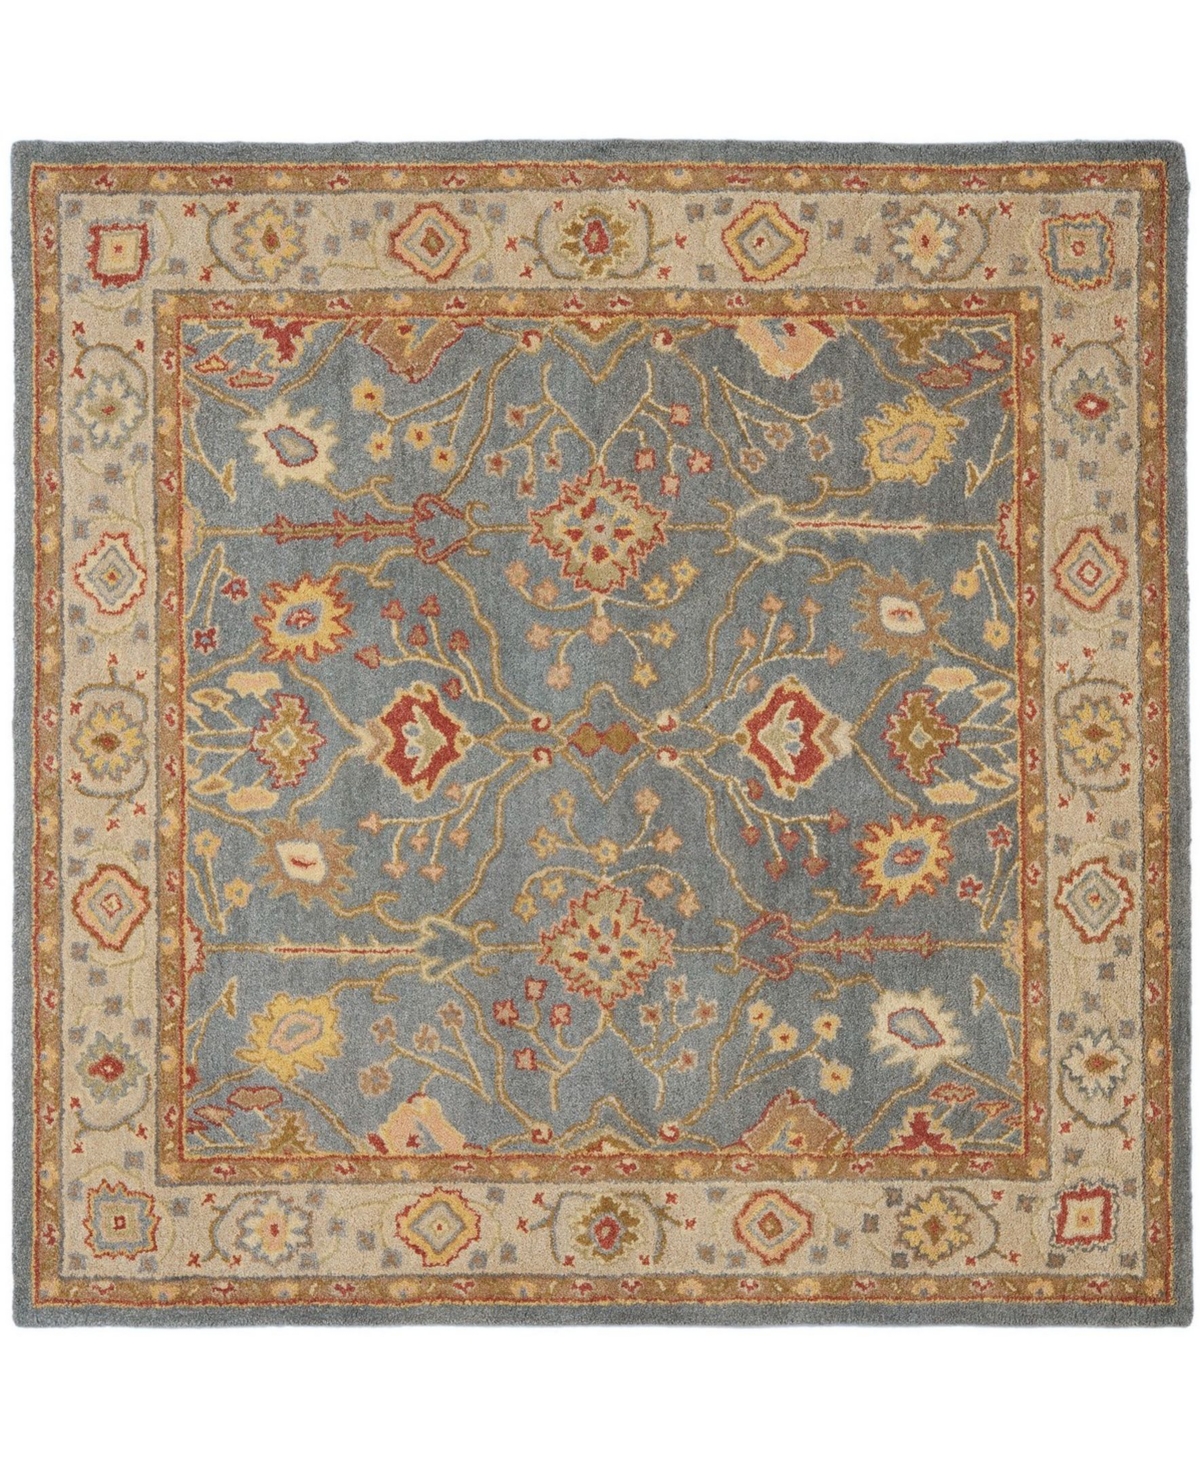 Safavieh Antiquity At314 Blue and Ivory 8' x 8' Square Area Rug - Blue